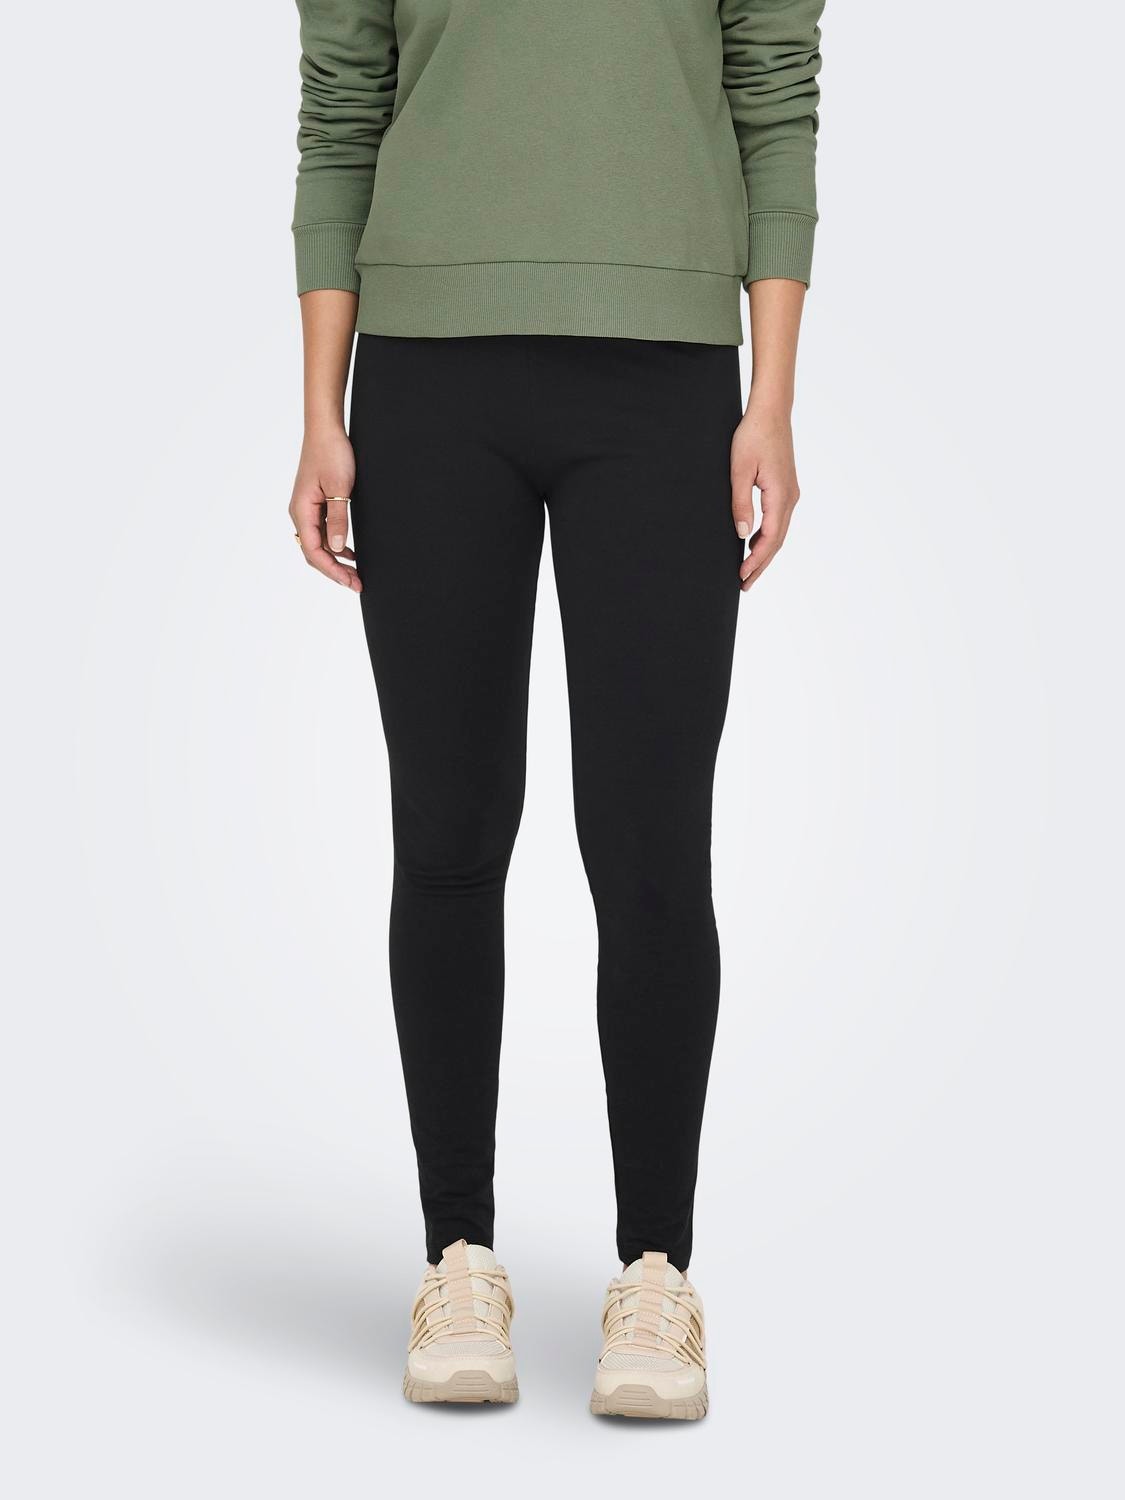 ONLY Tight Fit Mid waist Leggings -Black - 15300690